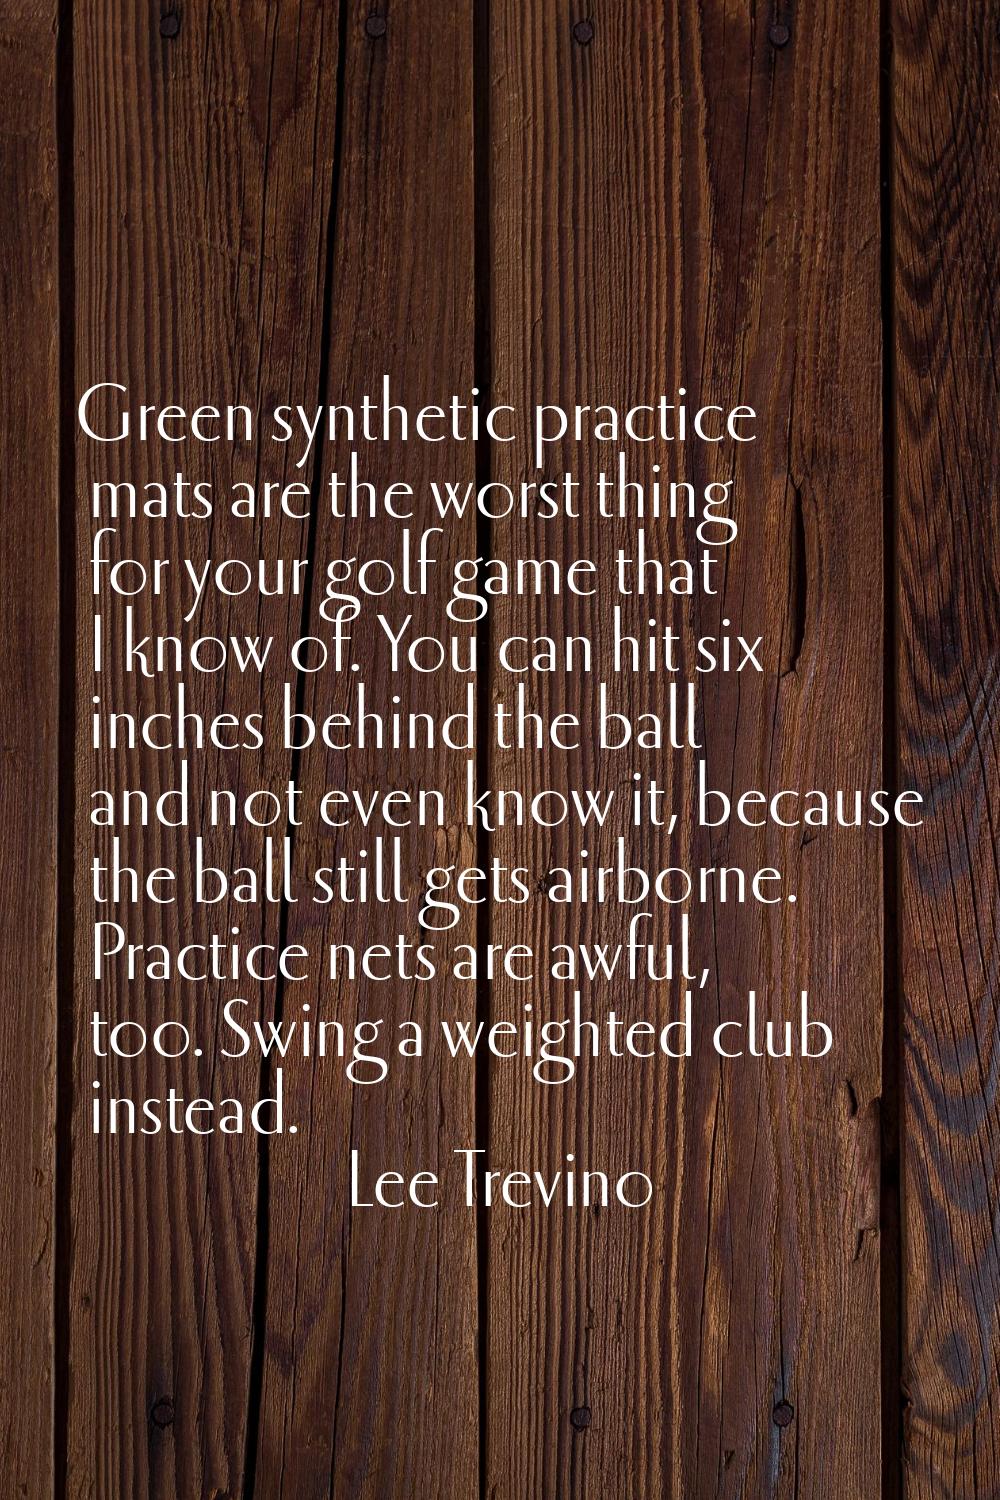 Green synthetic practice mats are the worst thing for your golf game that I know of. You can hit si